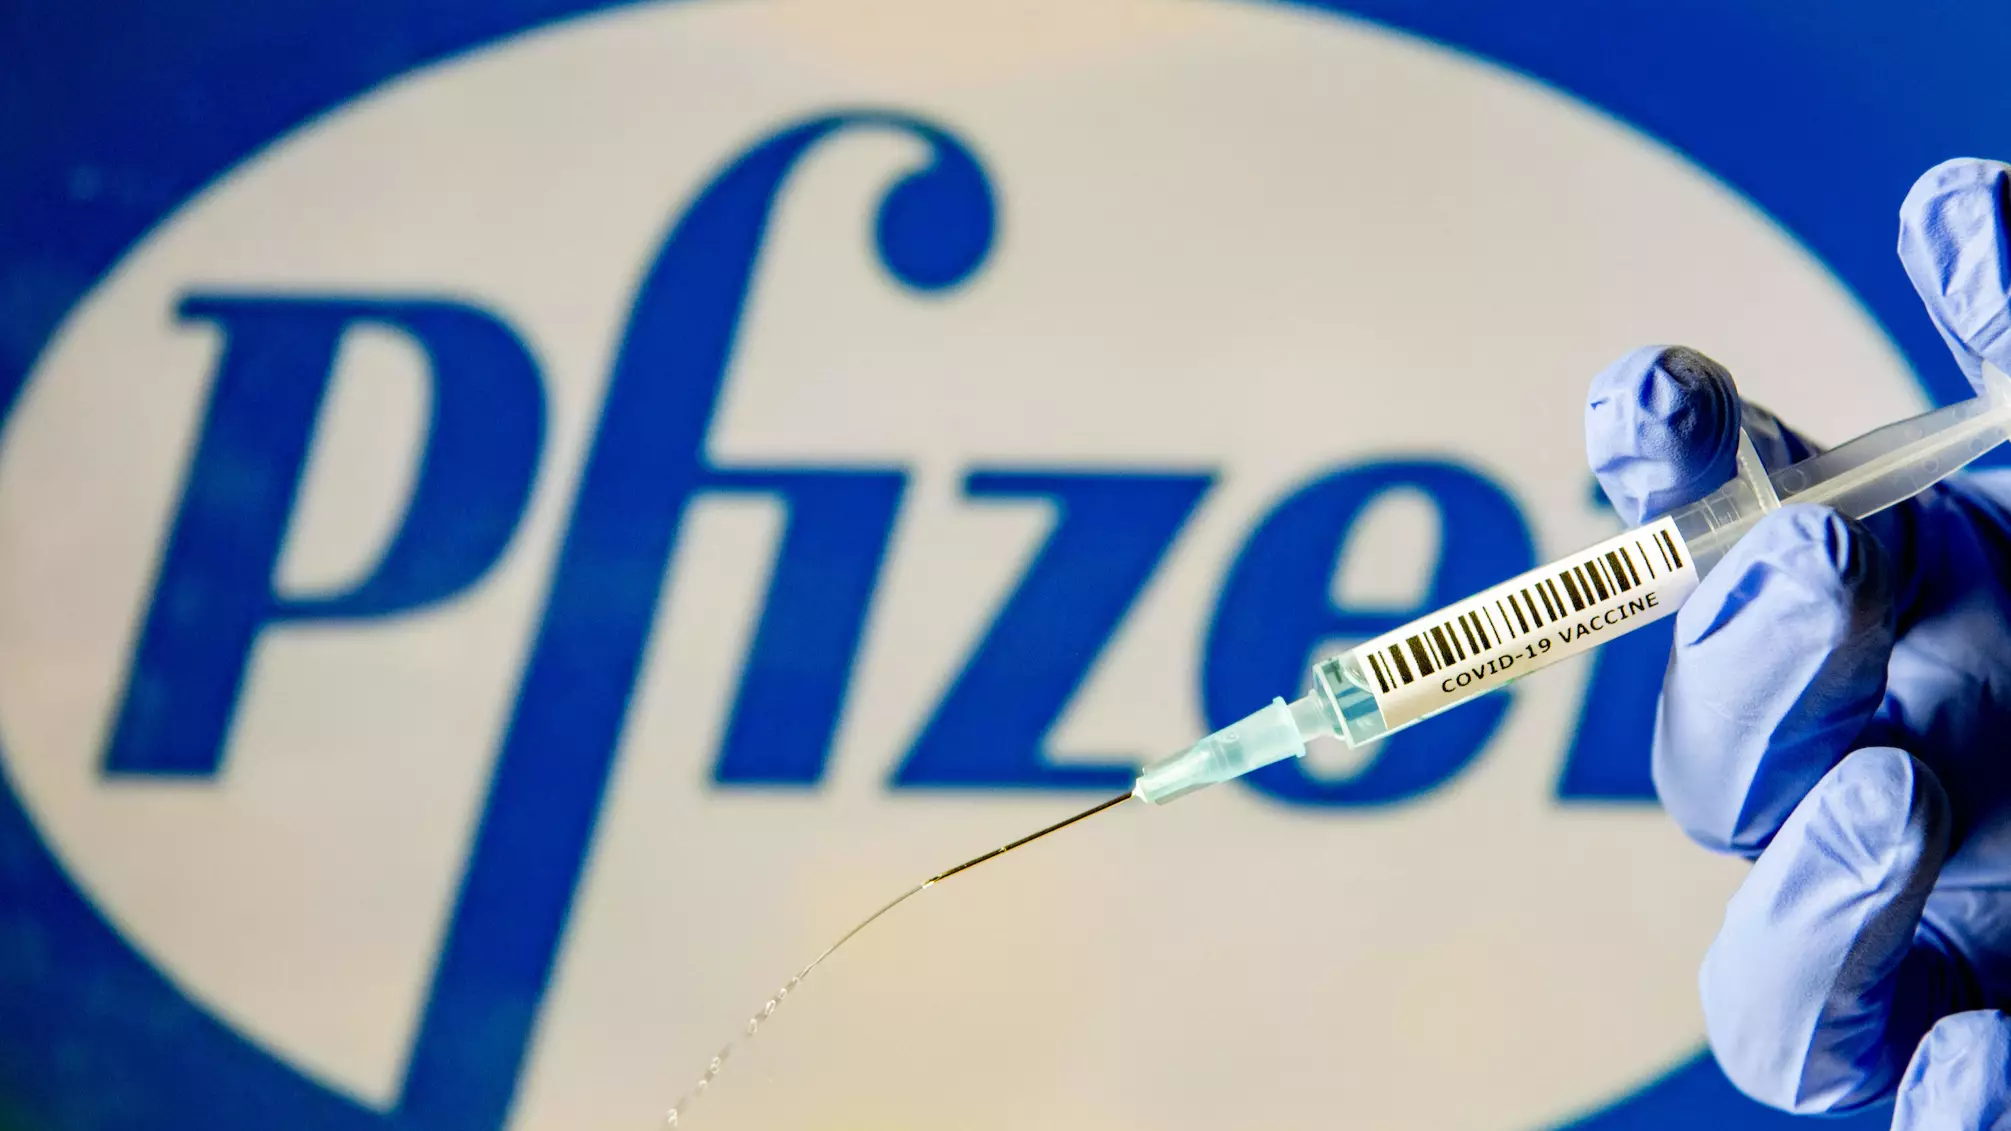 UK First Country To Approve Pfizer/BioNTech Covid Vaccine